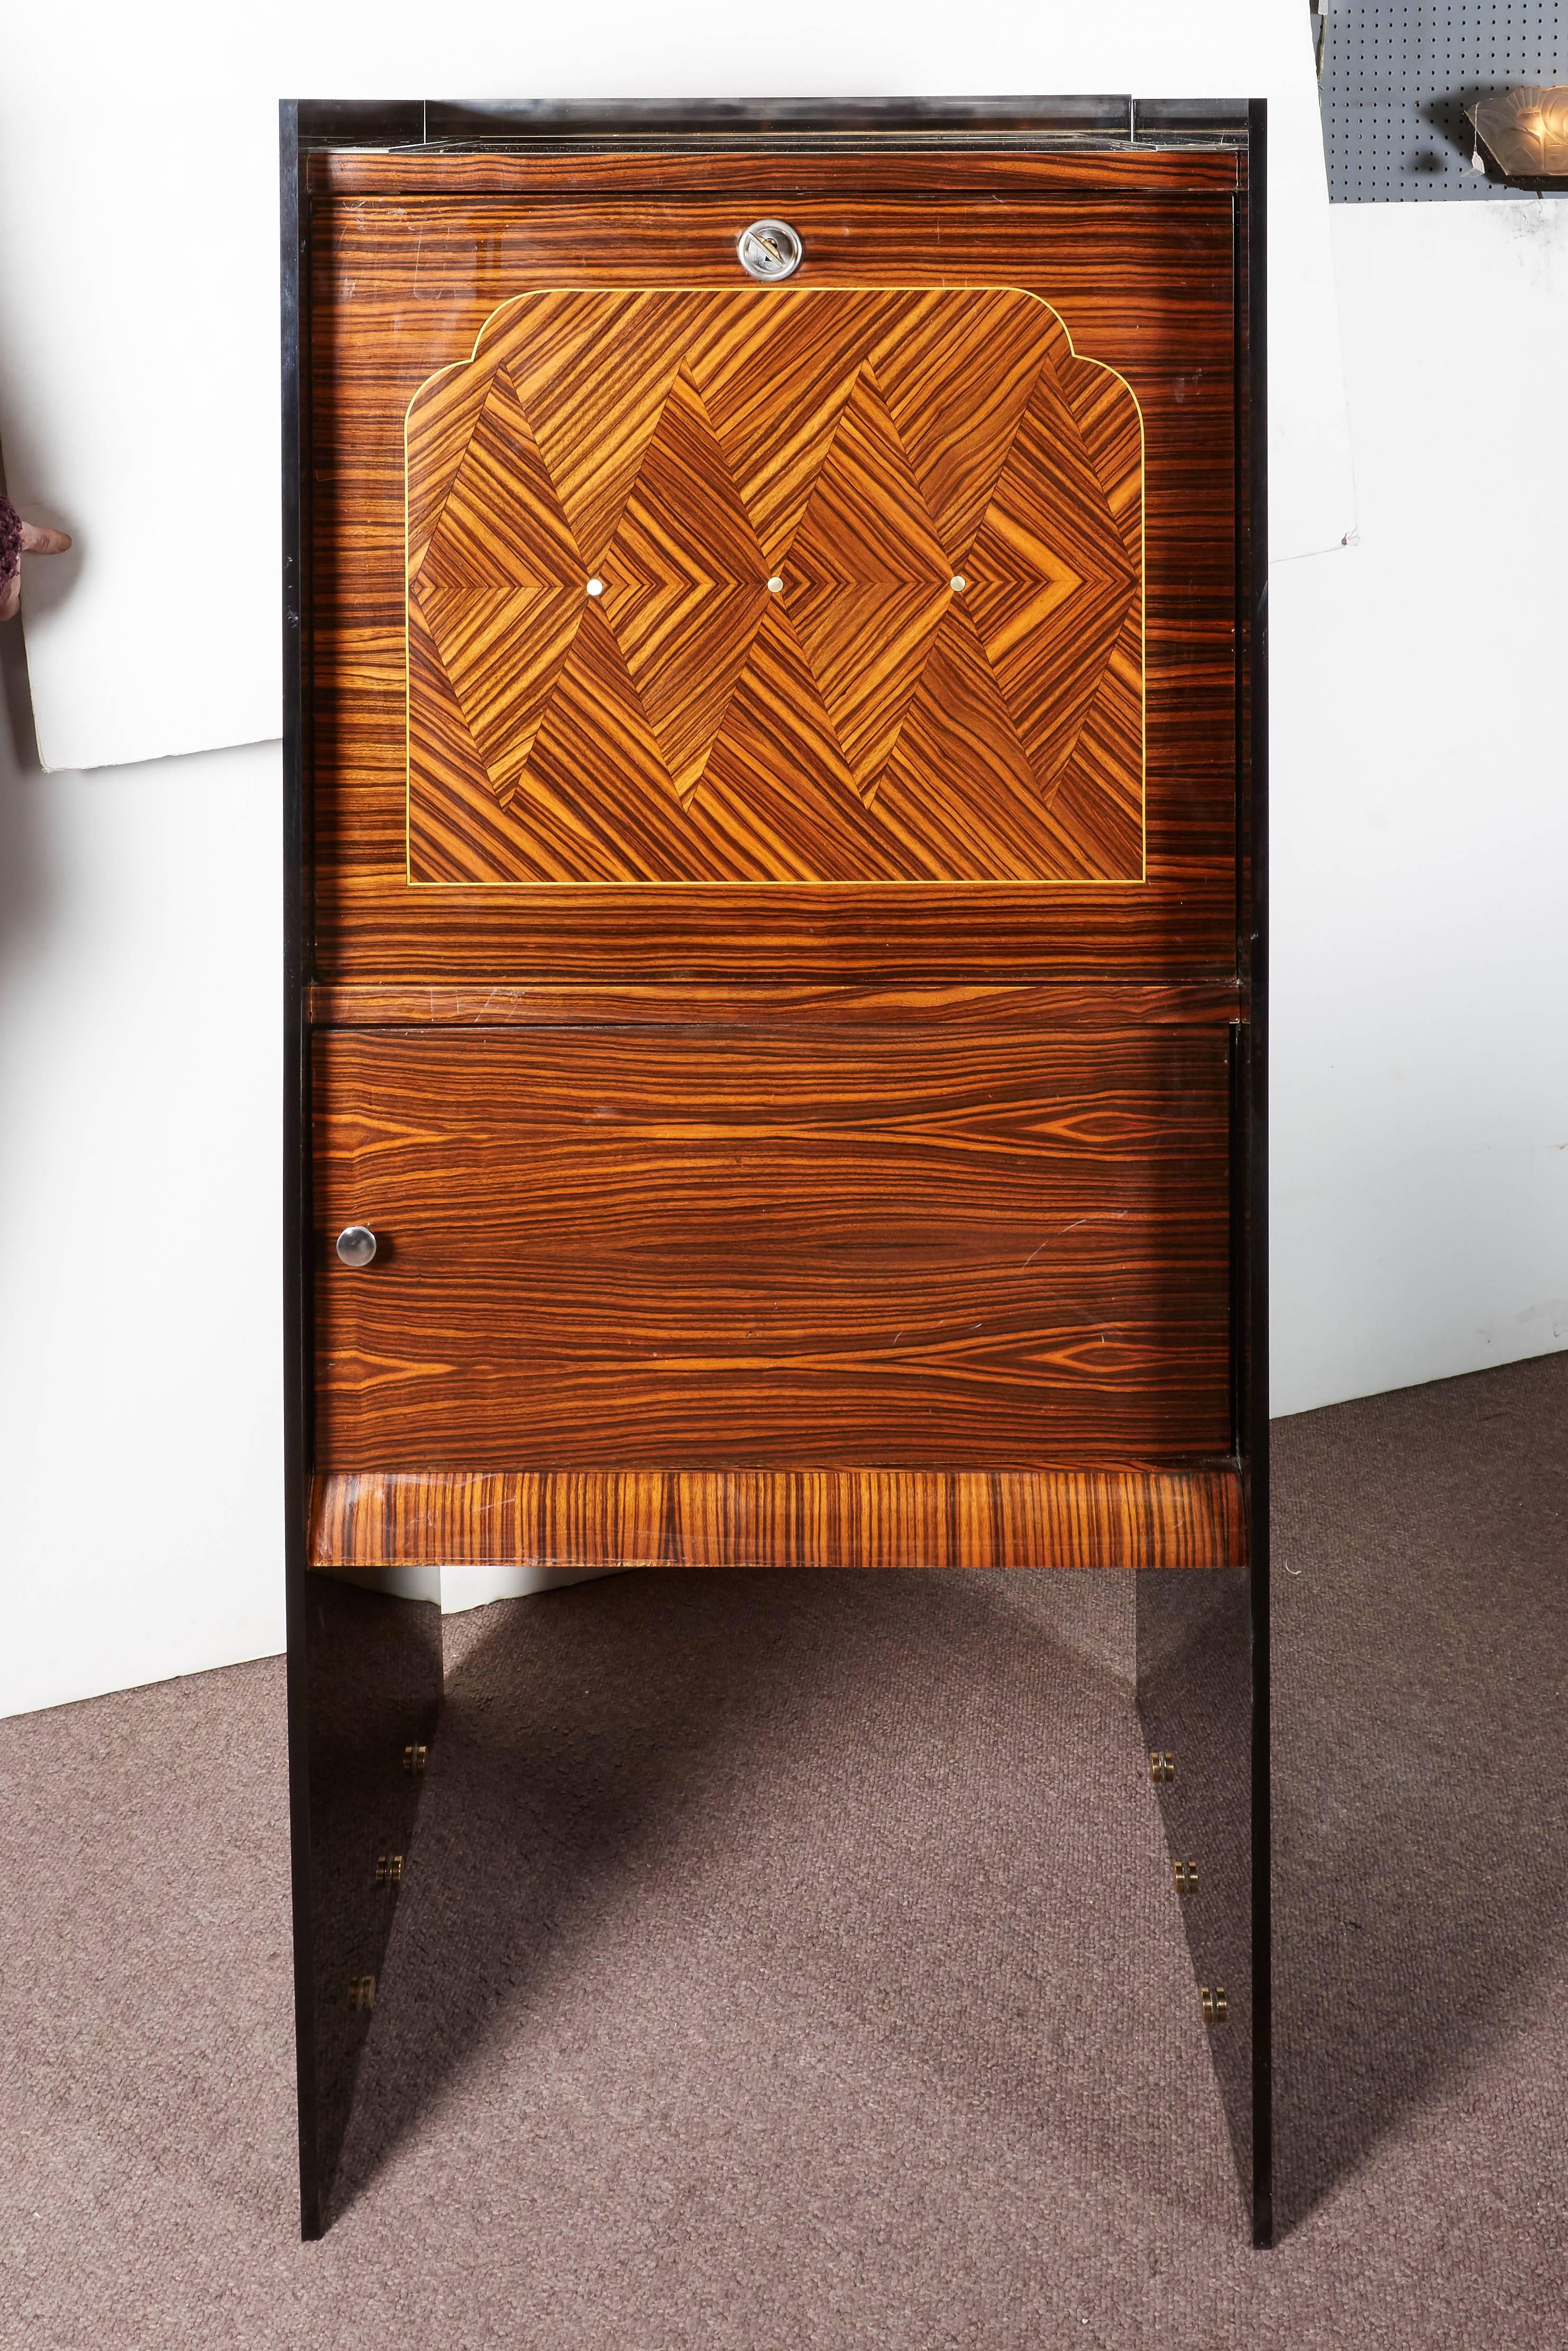 A fine French Art Deco ebene de Macassar drop front bar or secretaire. The exquisite geometric marquetry front door inlaid with mother-of-pearl dots opens to reveal a mahogany interior while the stepped black plexi panels extend the full length of